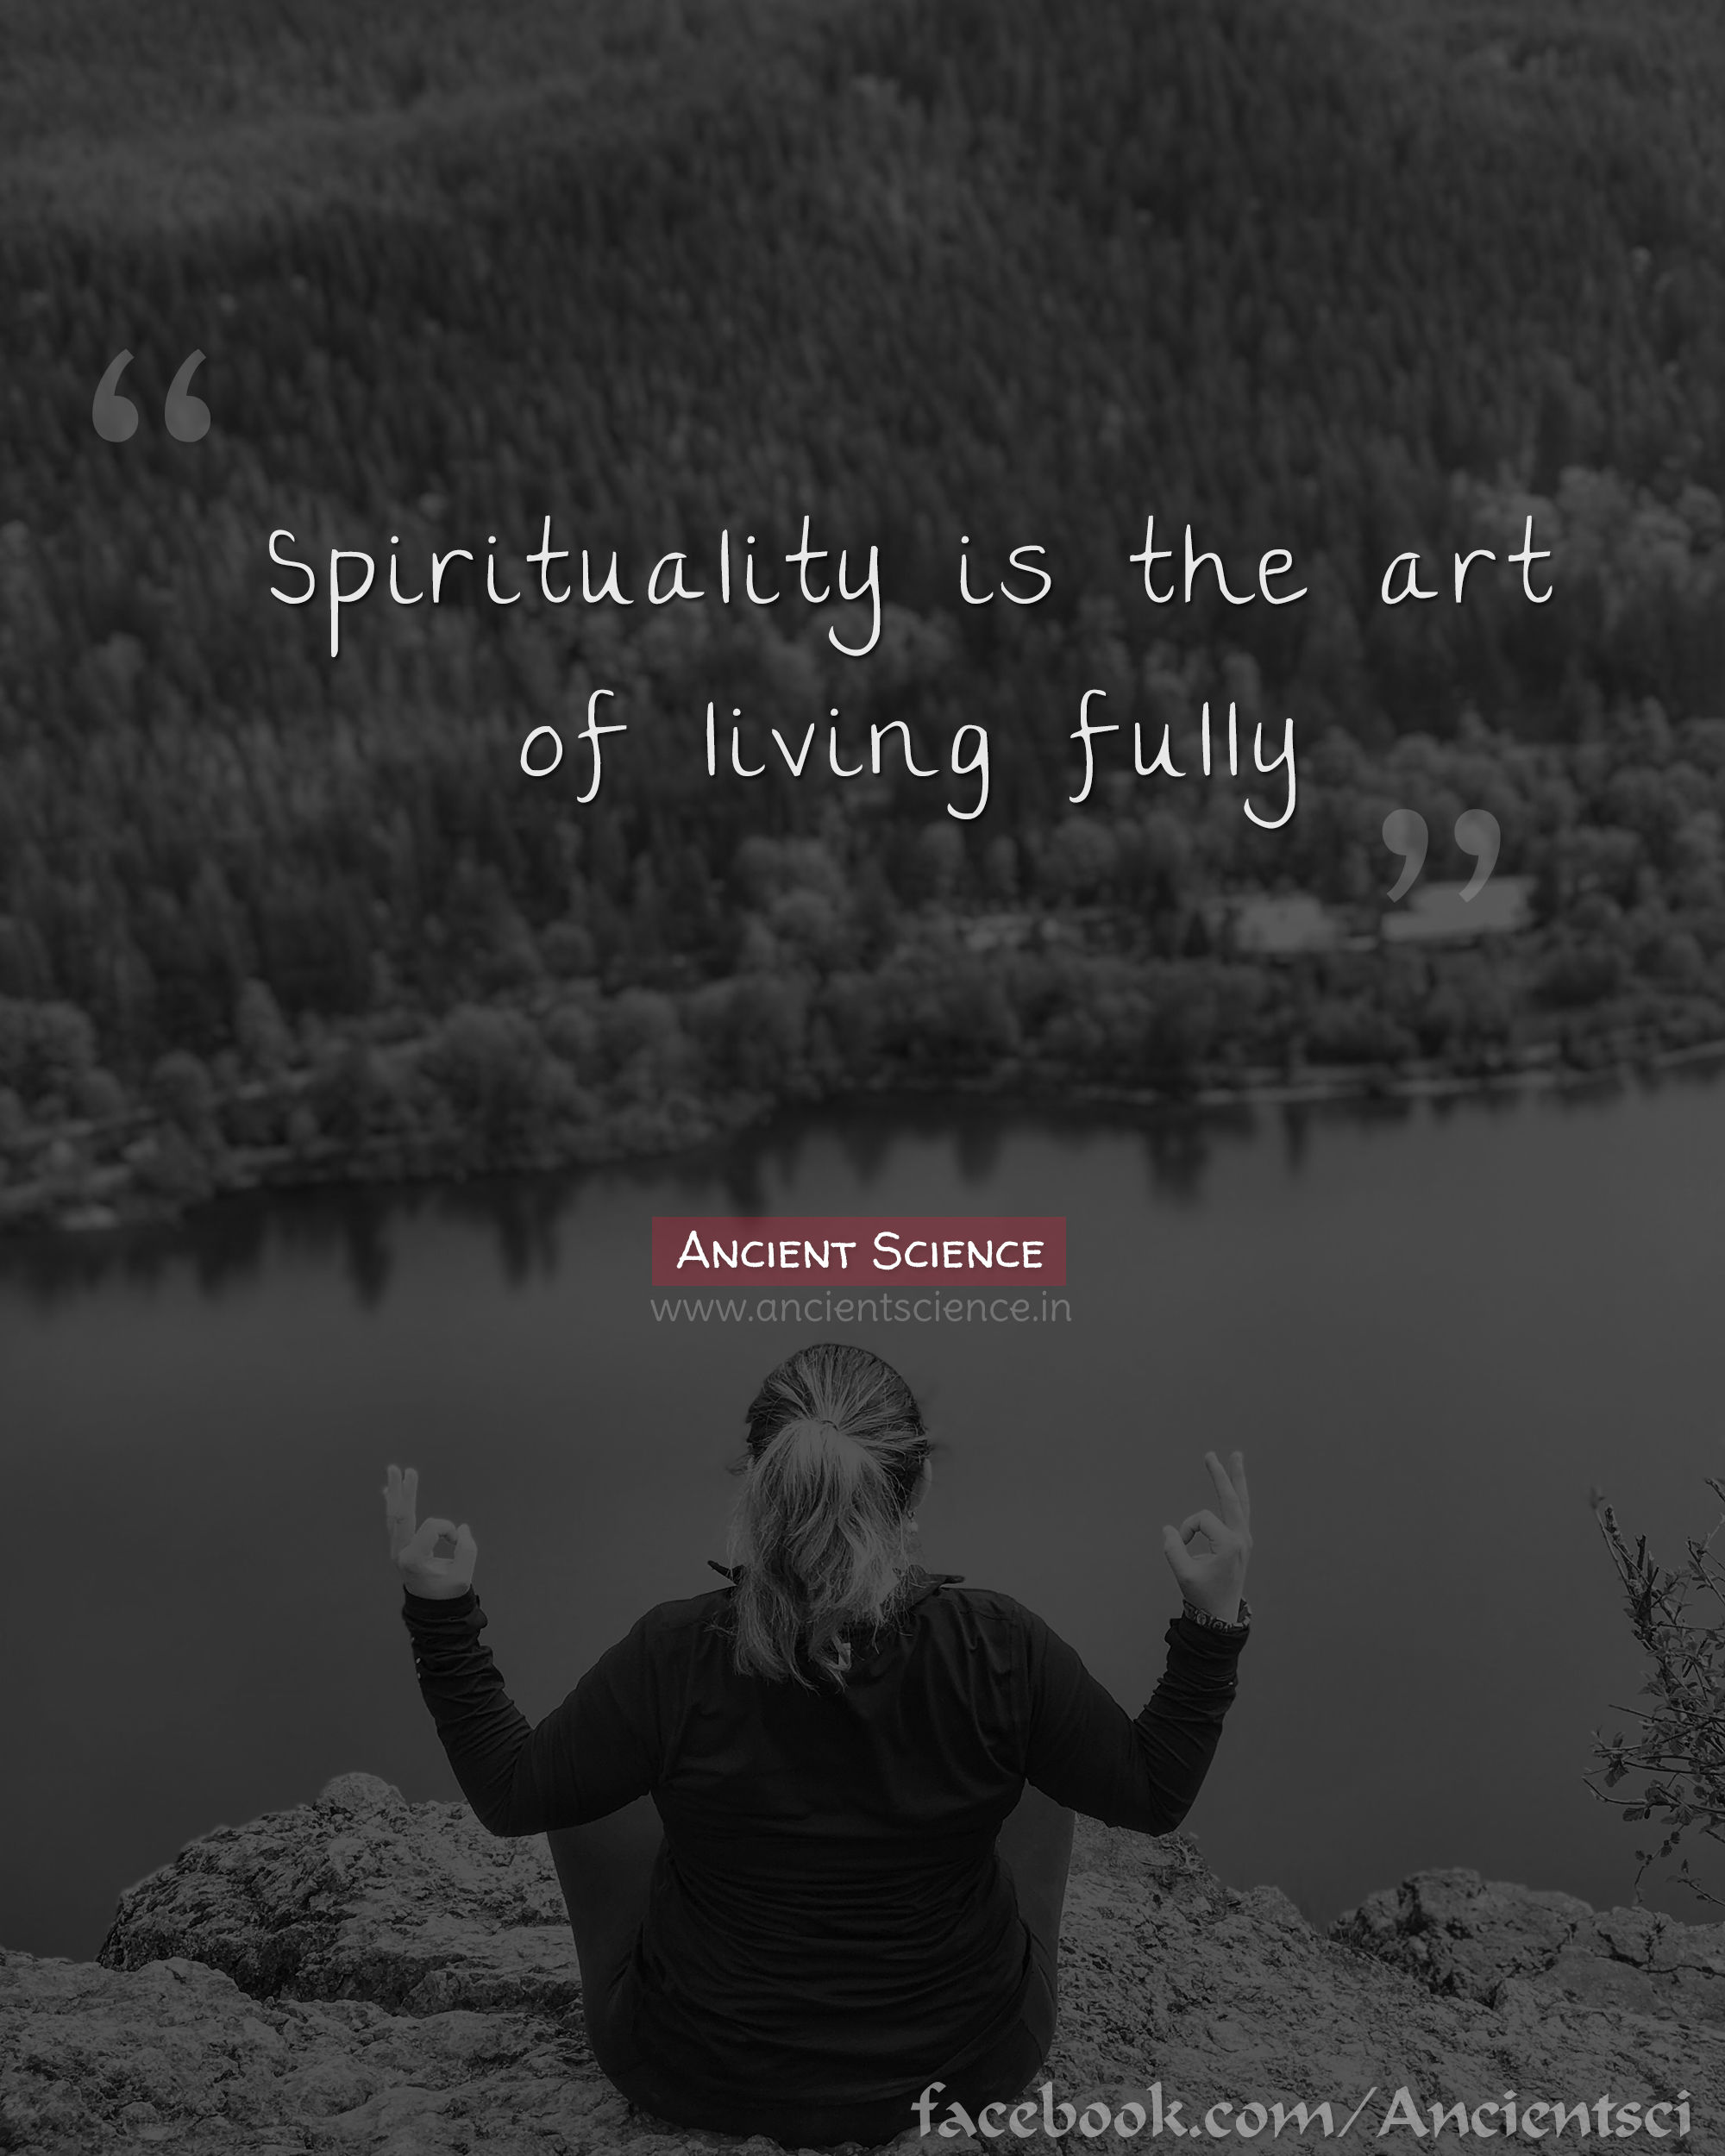 Spirituality is the art of living fully